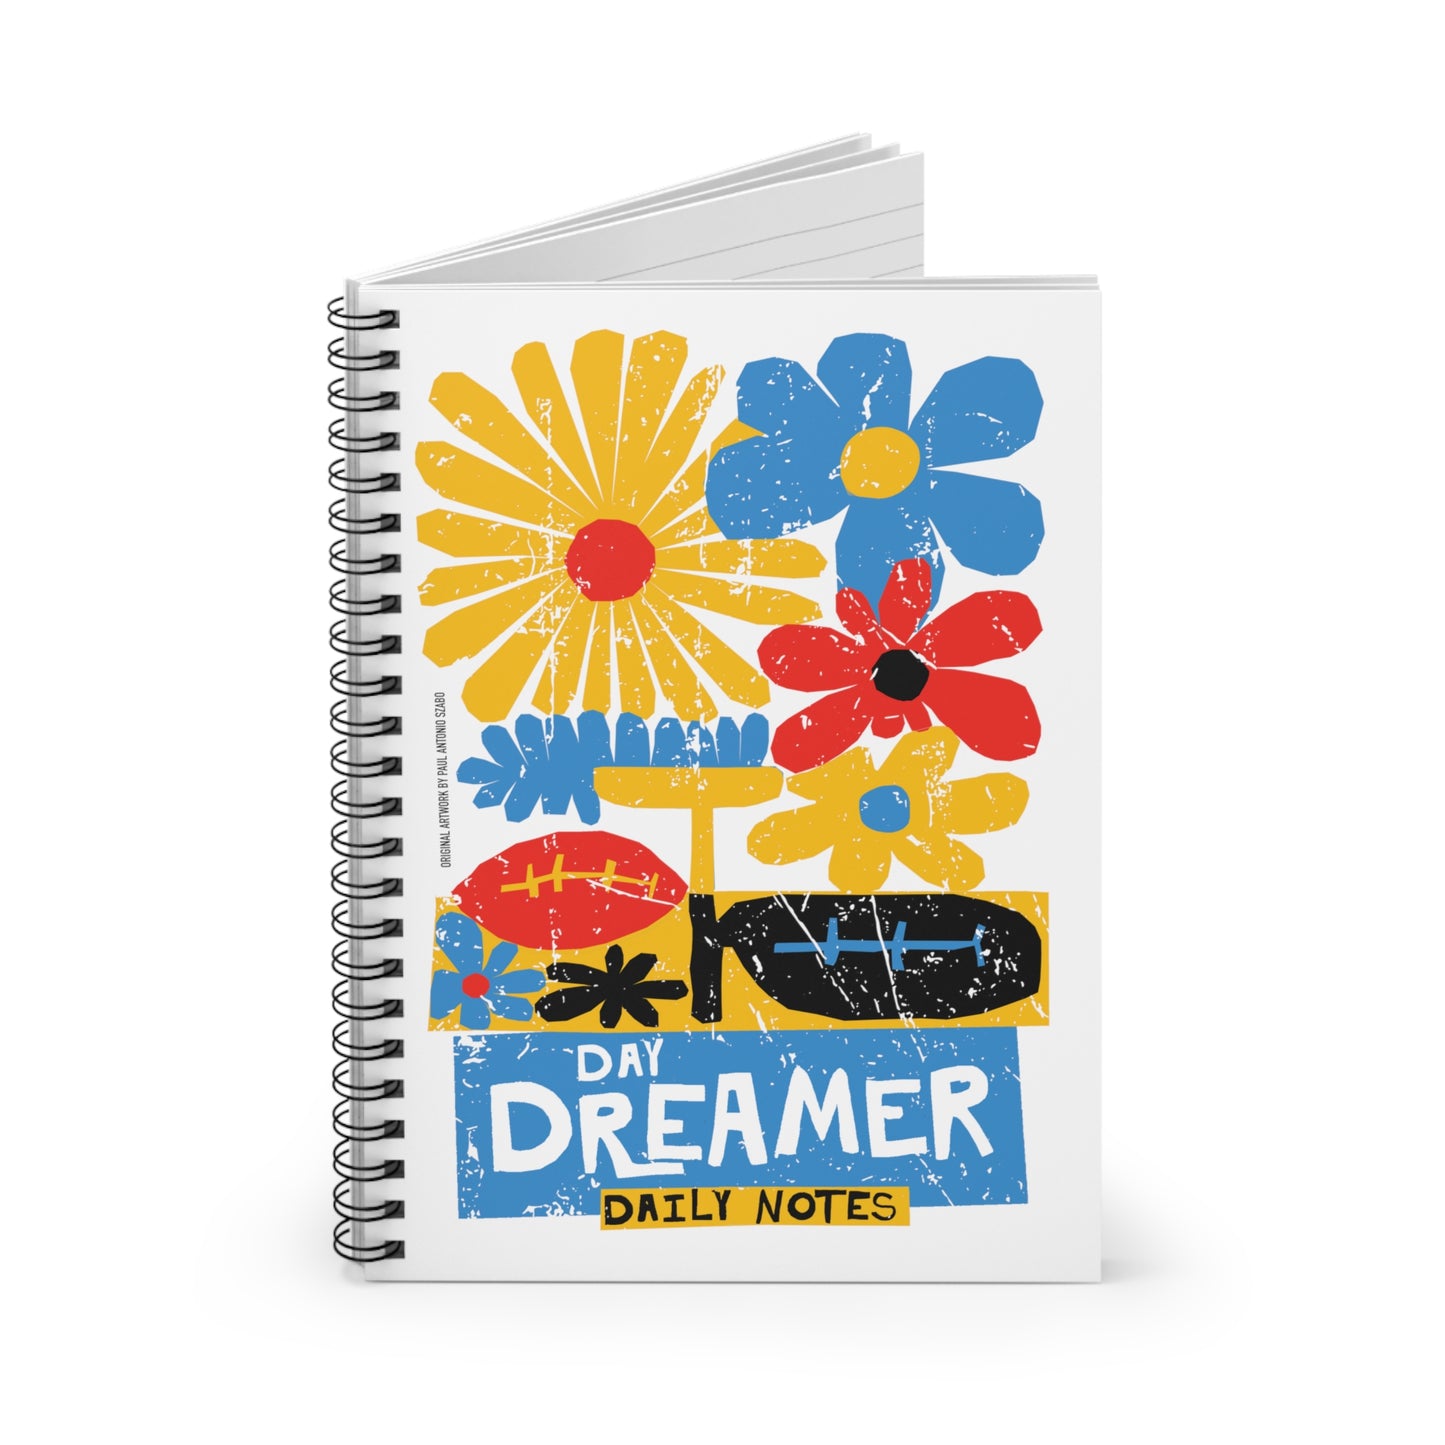 Day Dreamer. Daily Notes, Spiral Handwriting Note Book by United Day Dreamers